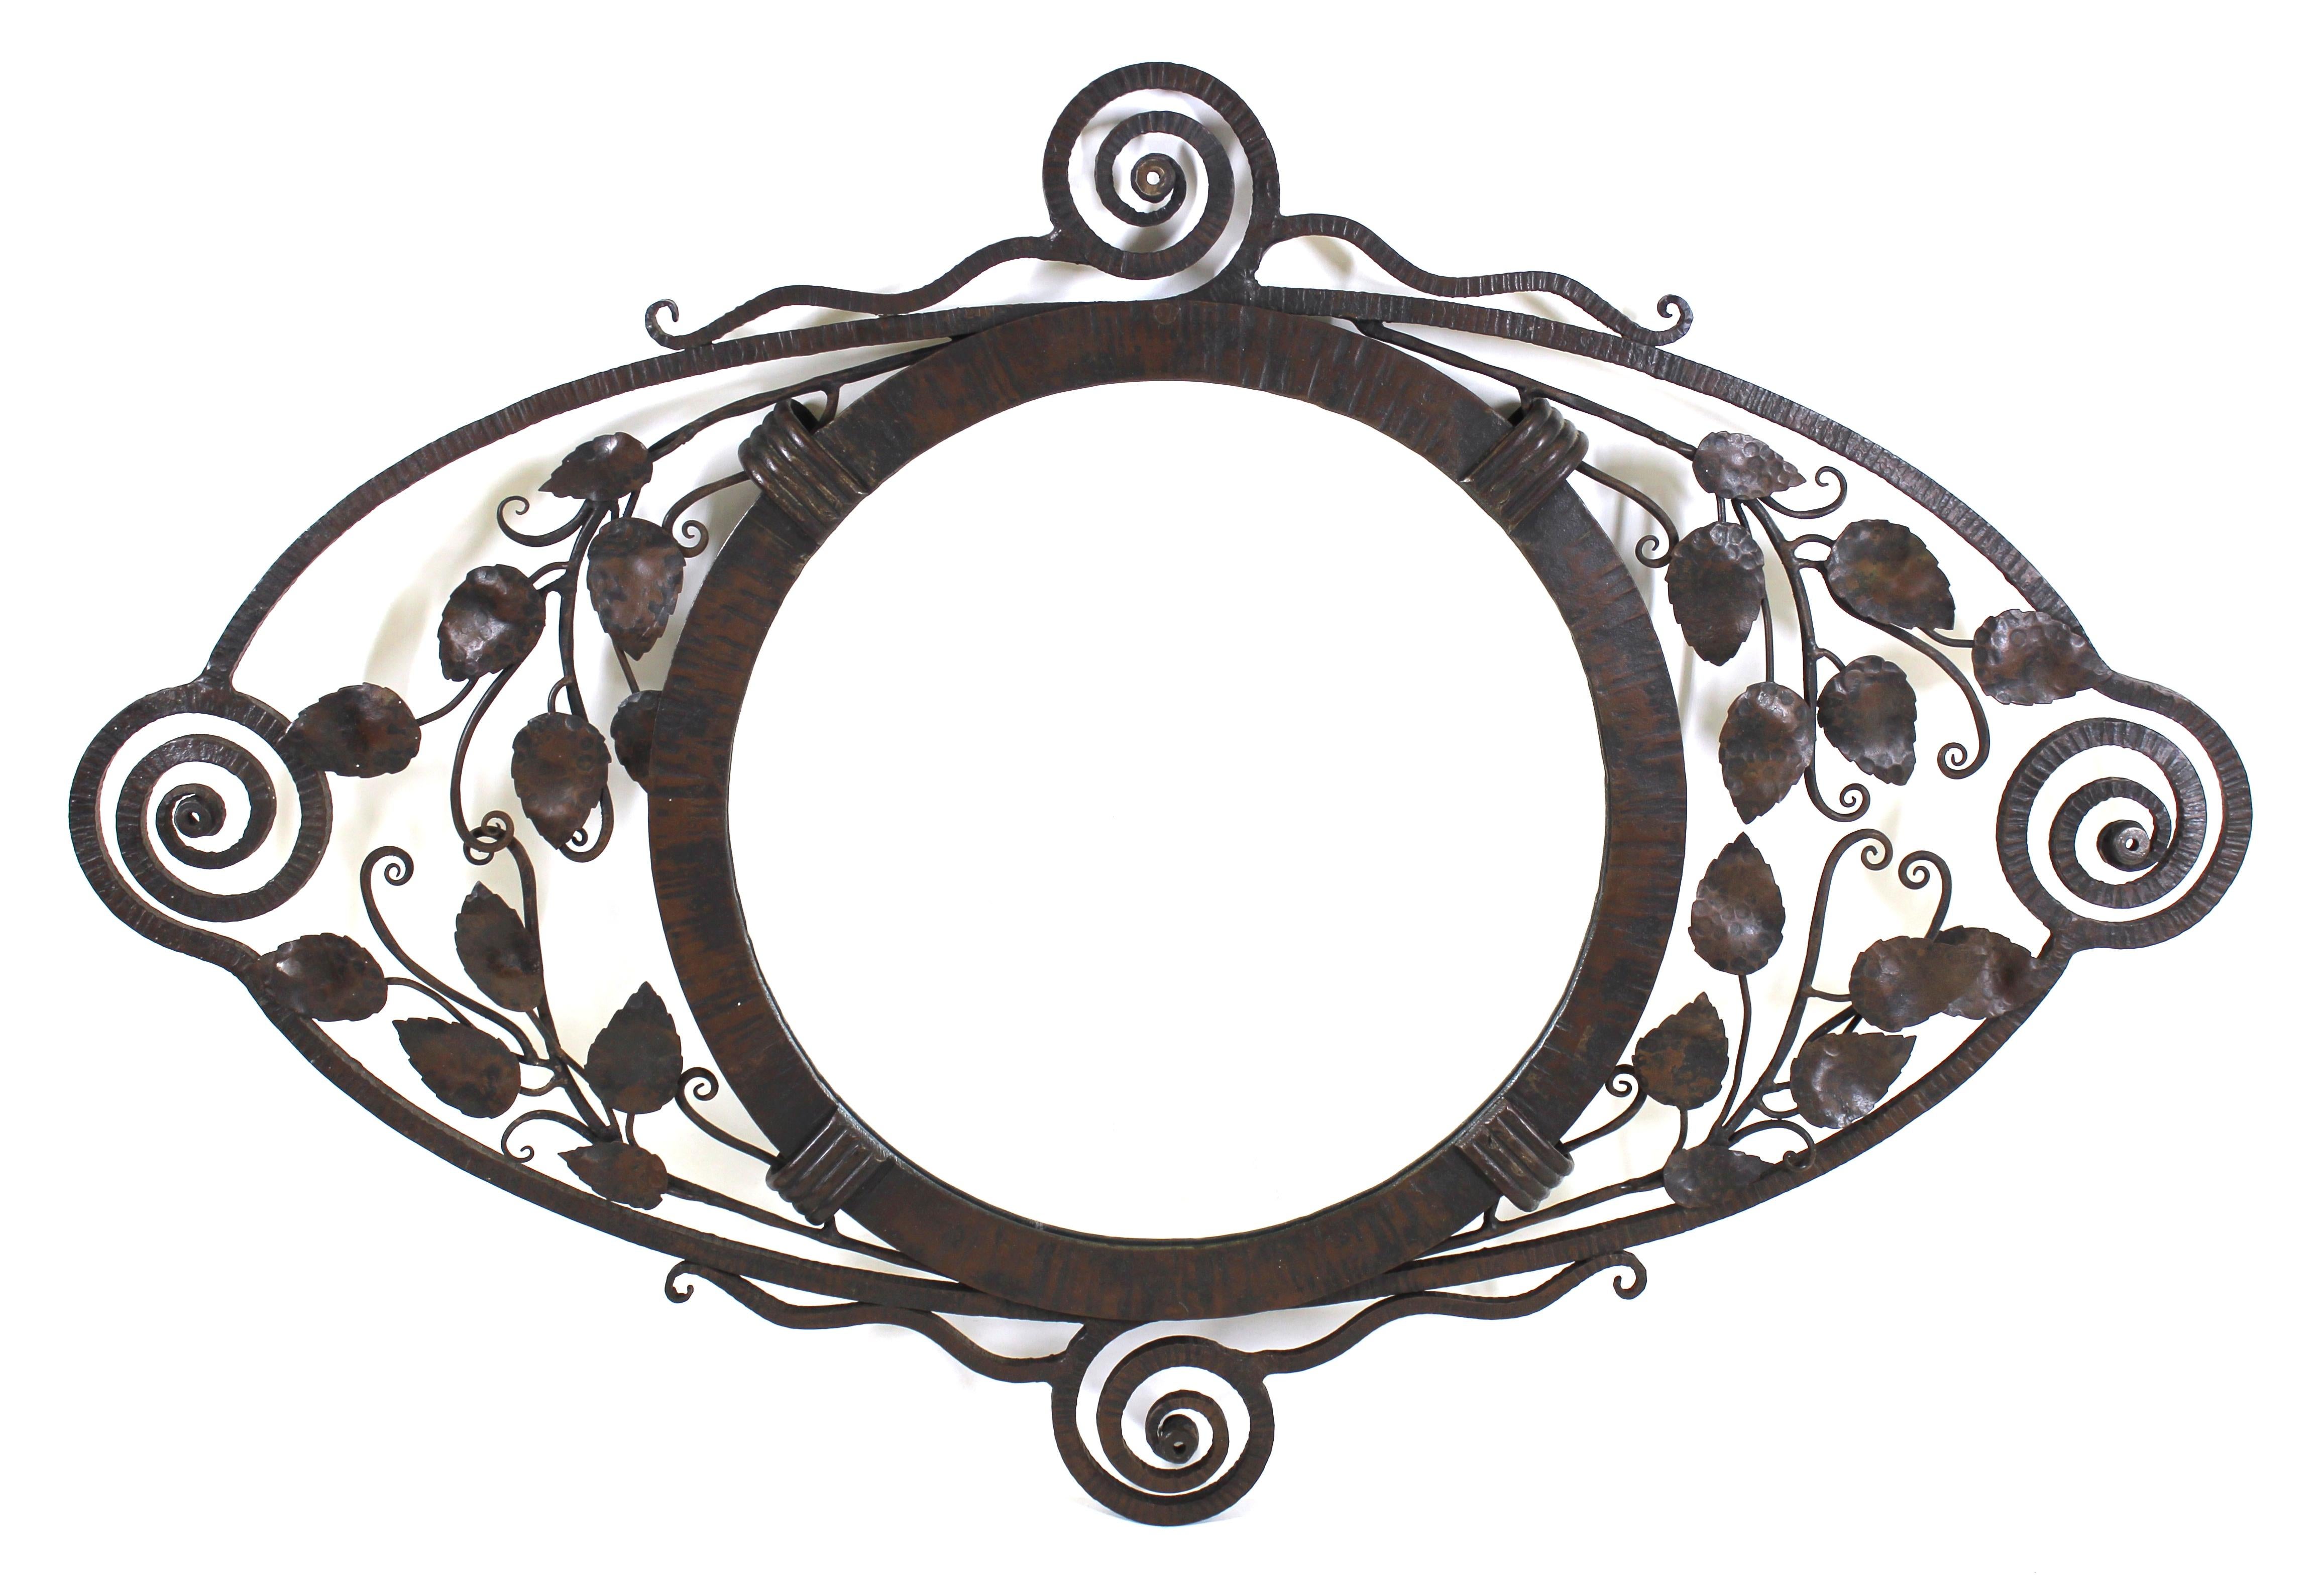 French Art Deco wrought metal wall mirror with textured ridged edge, round mirror glass and ornamental foliage and swirls, attributed to Edgar Brandt.